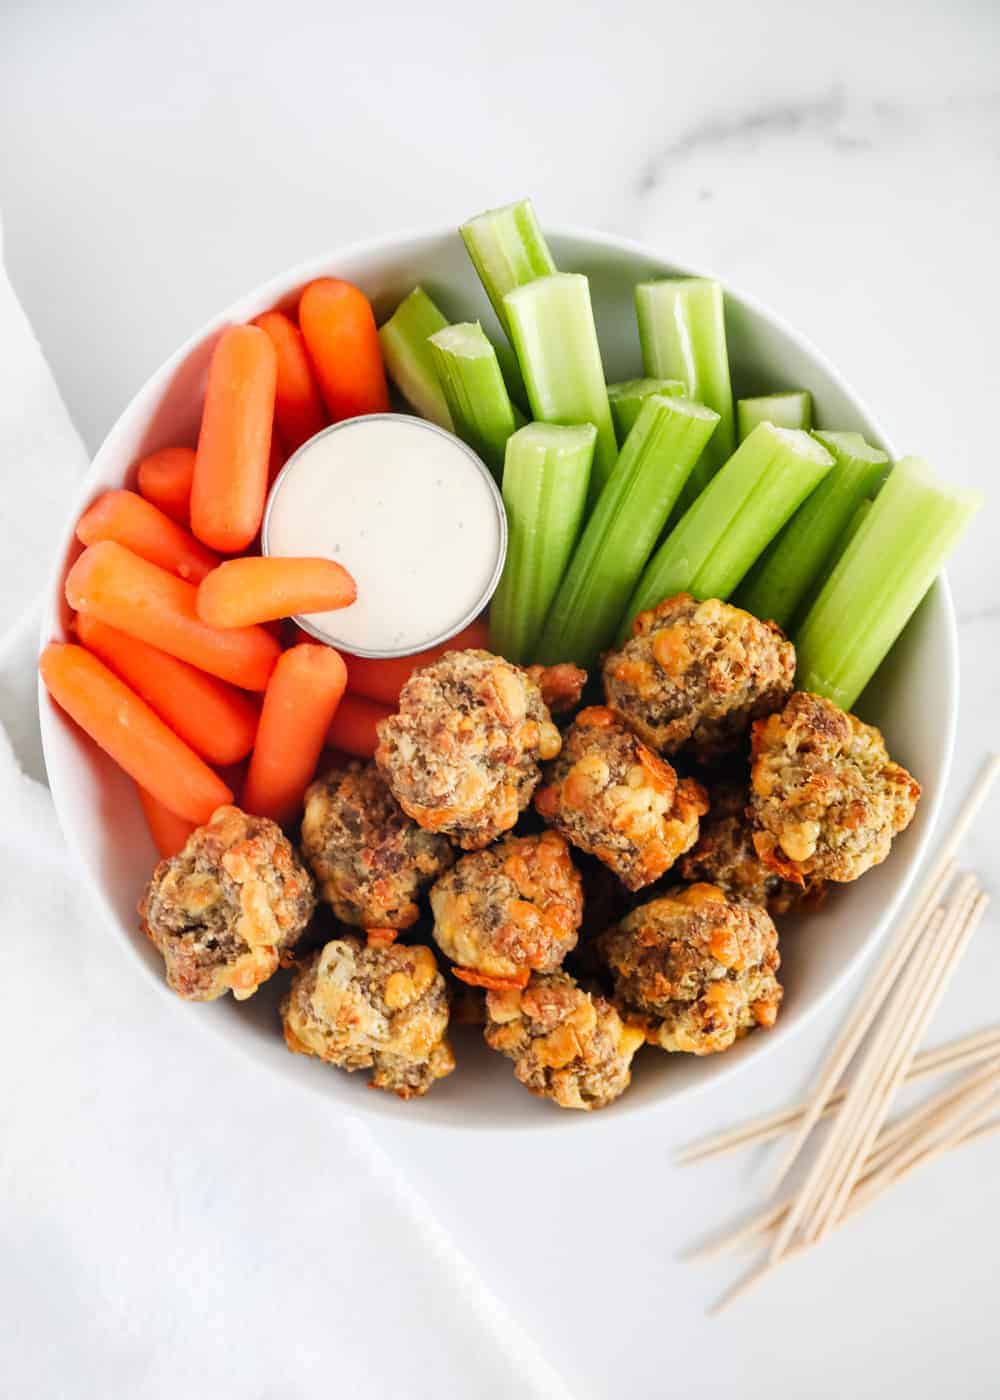 Sausage balls in a white bowl with vegetables.